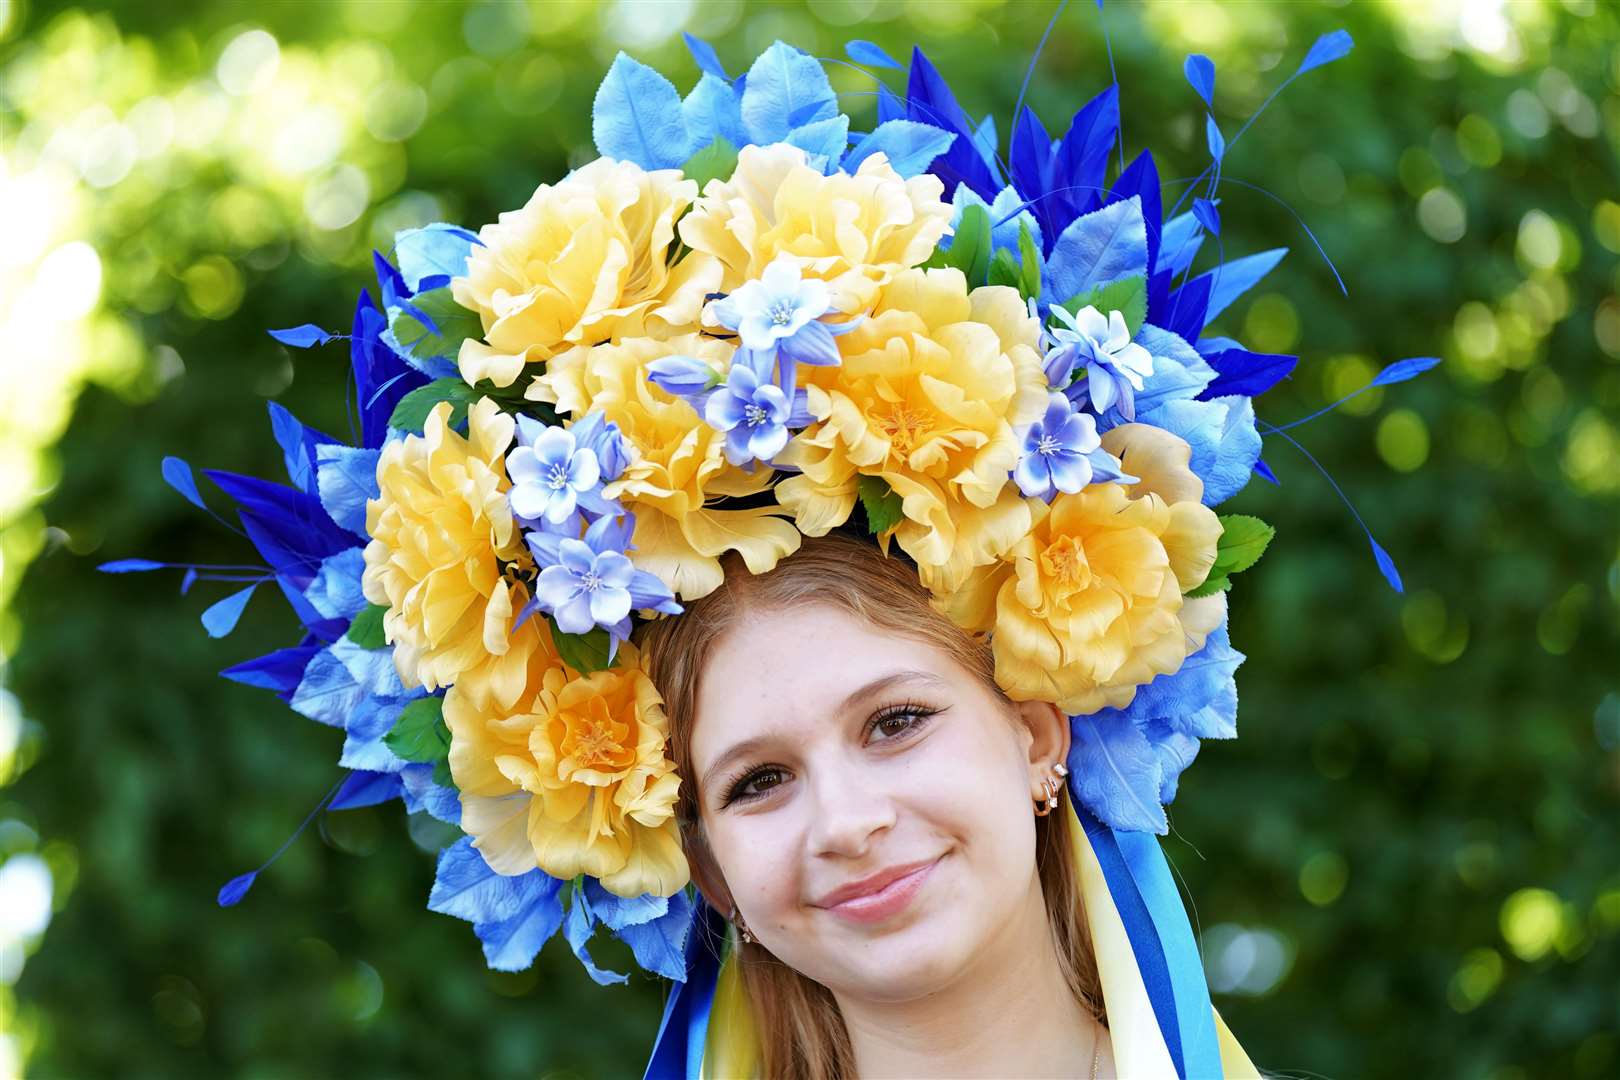 A racegoer from Ukraine, Maria Turtus, poses for a photograph (Aaron Chown/PA)